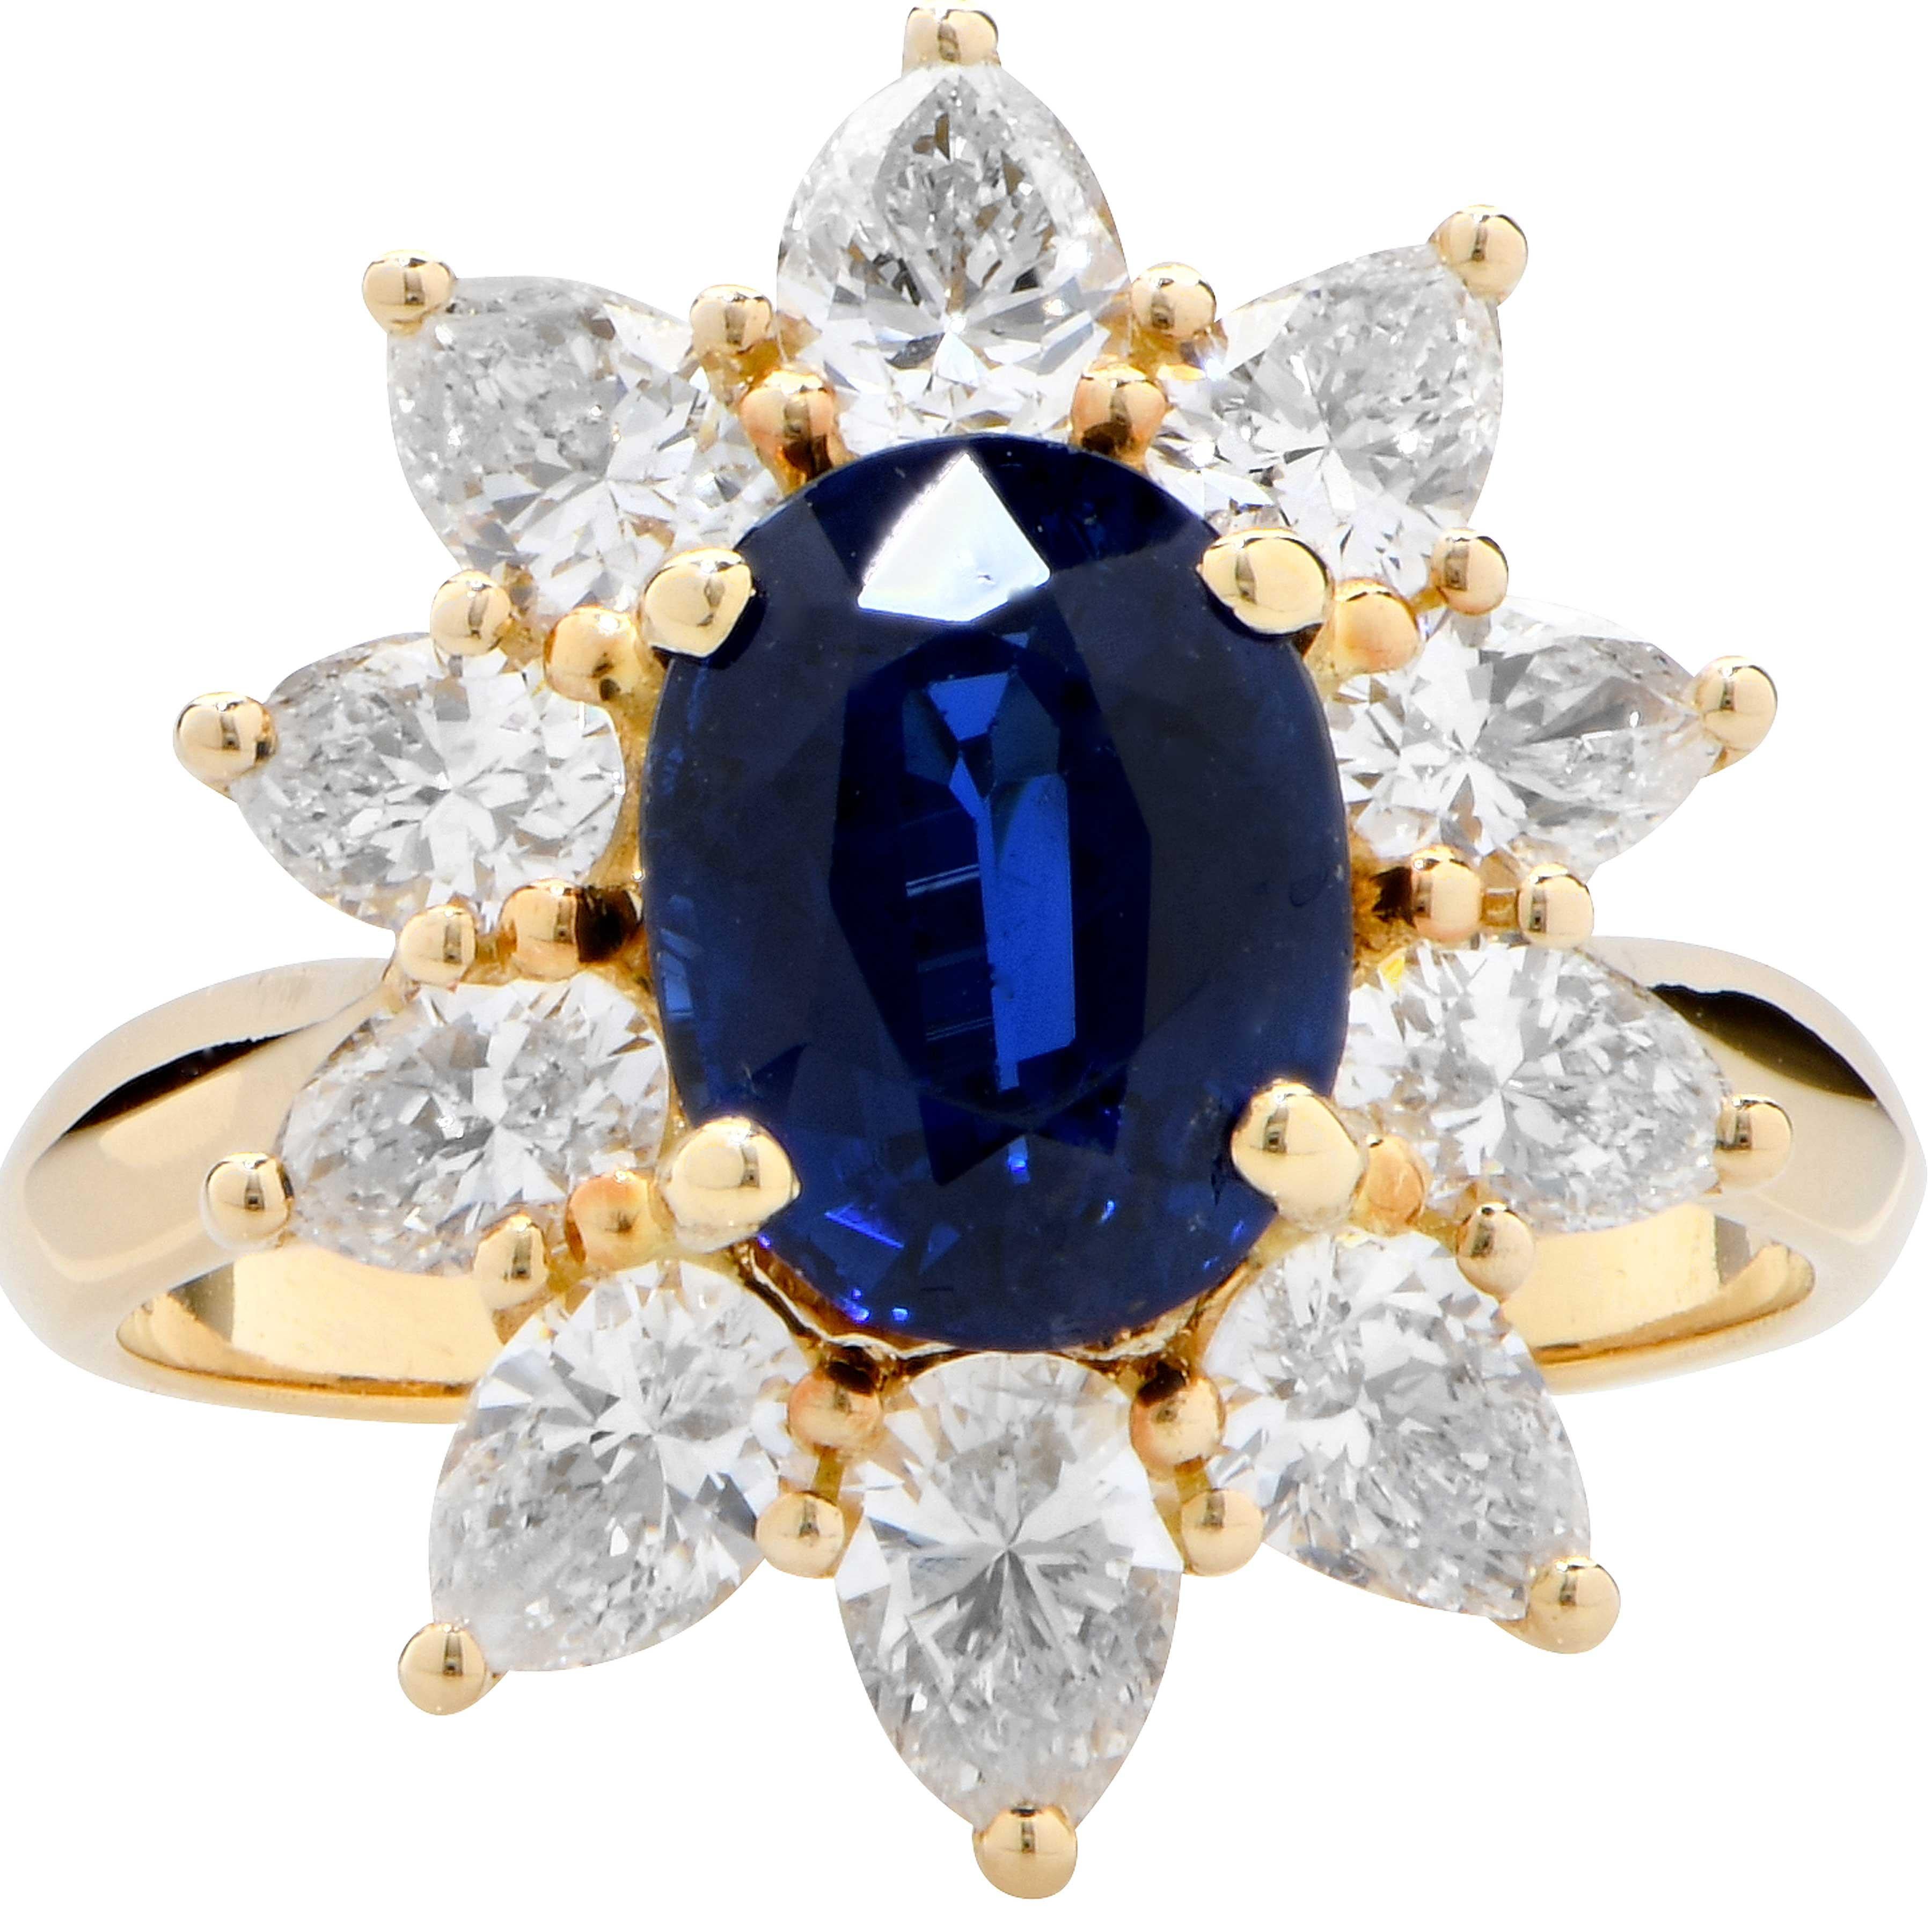 This beautiful sapphire and diamond ring was manufactured by Asprey of London, Jewelers to the Queen. The ring features an oval cut blue sapphire with an approximate weight of 2.30 carats surrounded by 10 pear shape diamonds with an approximate